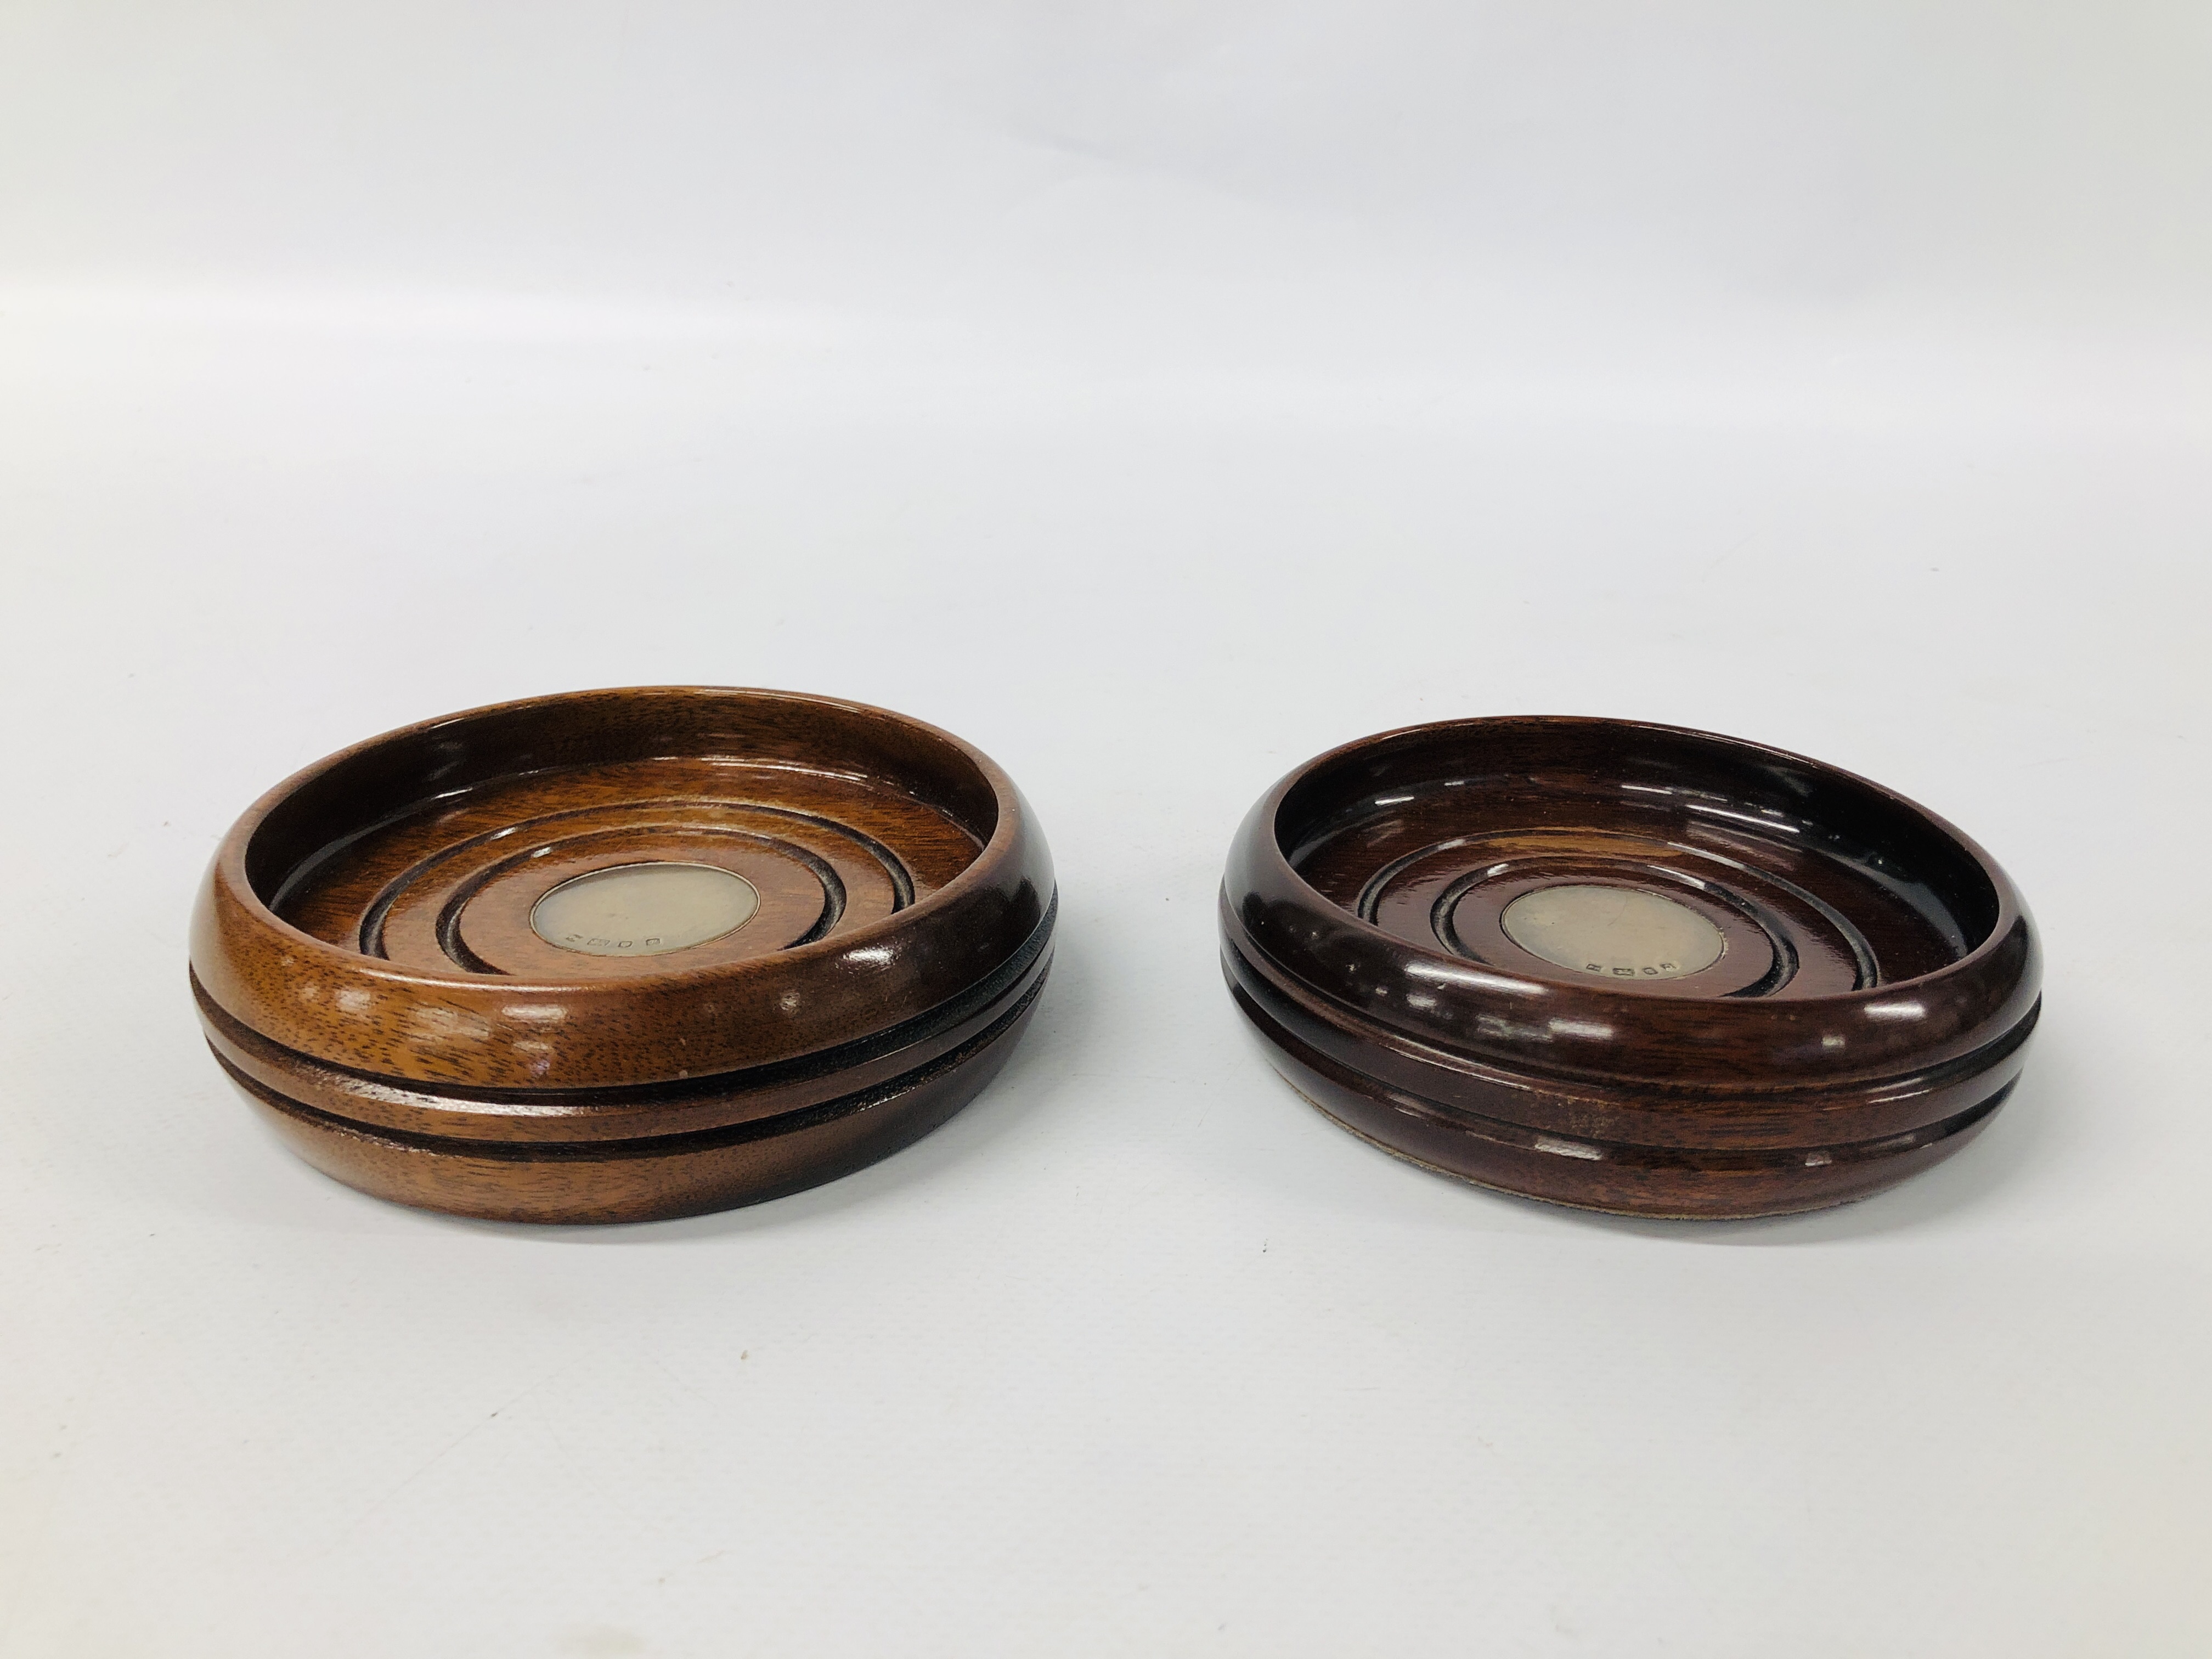 PAIR OF MAHOGANY WINE COASTERS WITH SILVER DISC INSERTS.